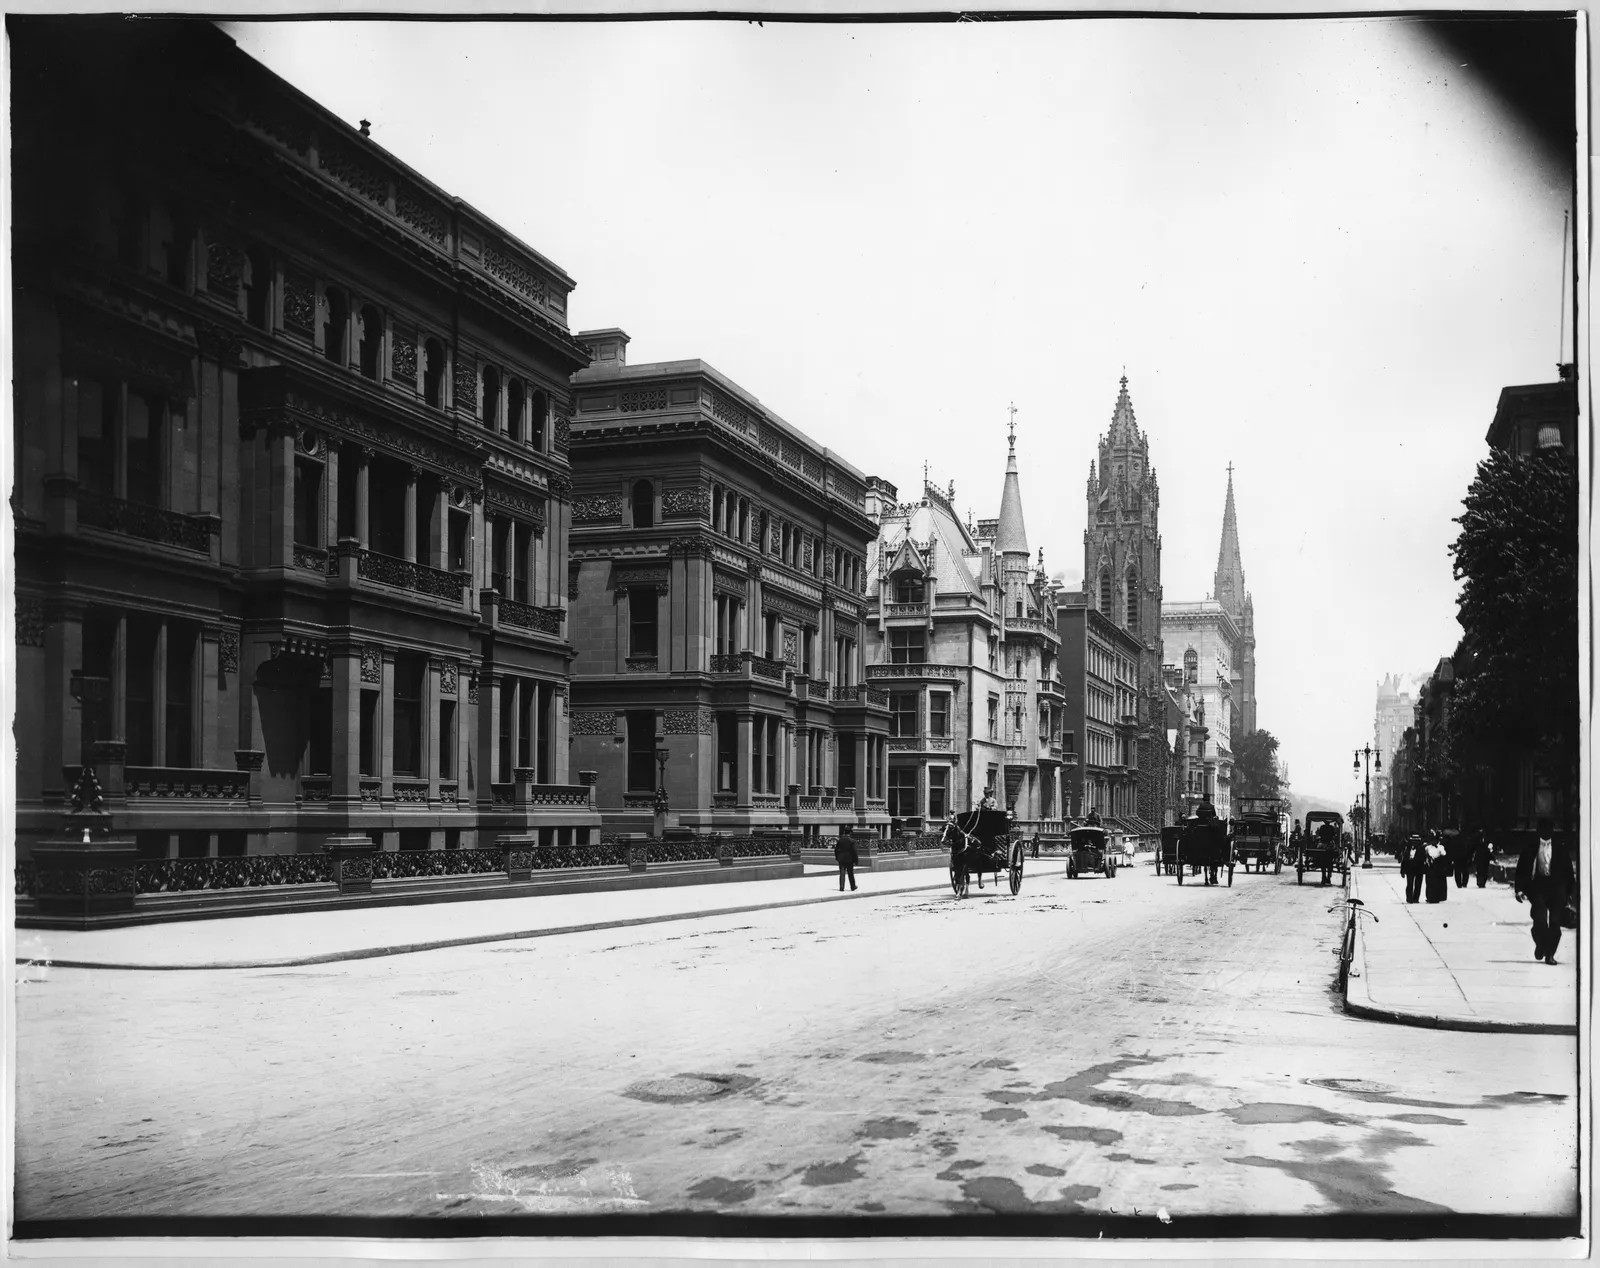 Vanderbilt mansions on Fifth Avenue, New York, New York, 1895. The Petit Chateau on 660 Fifth Avenue and part of the Triple Palace are visible (Foto: Reprodução/ The New York Historical Society)